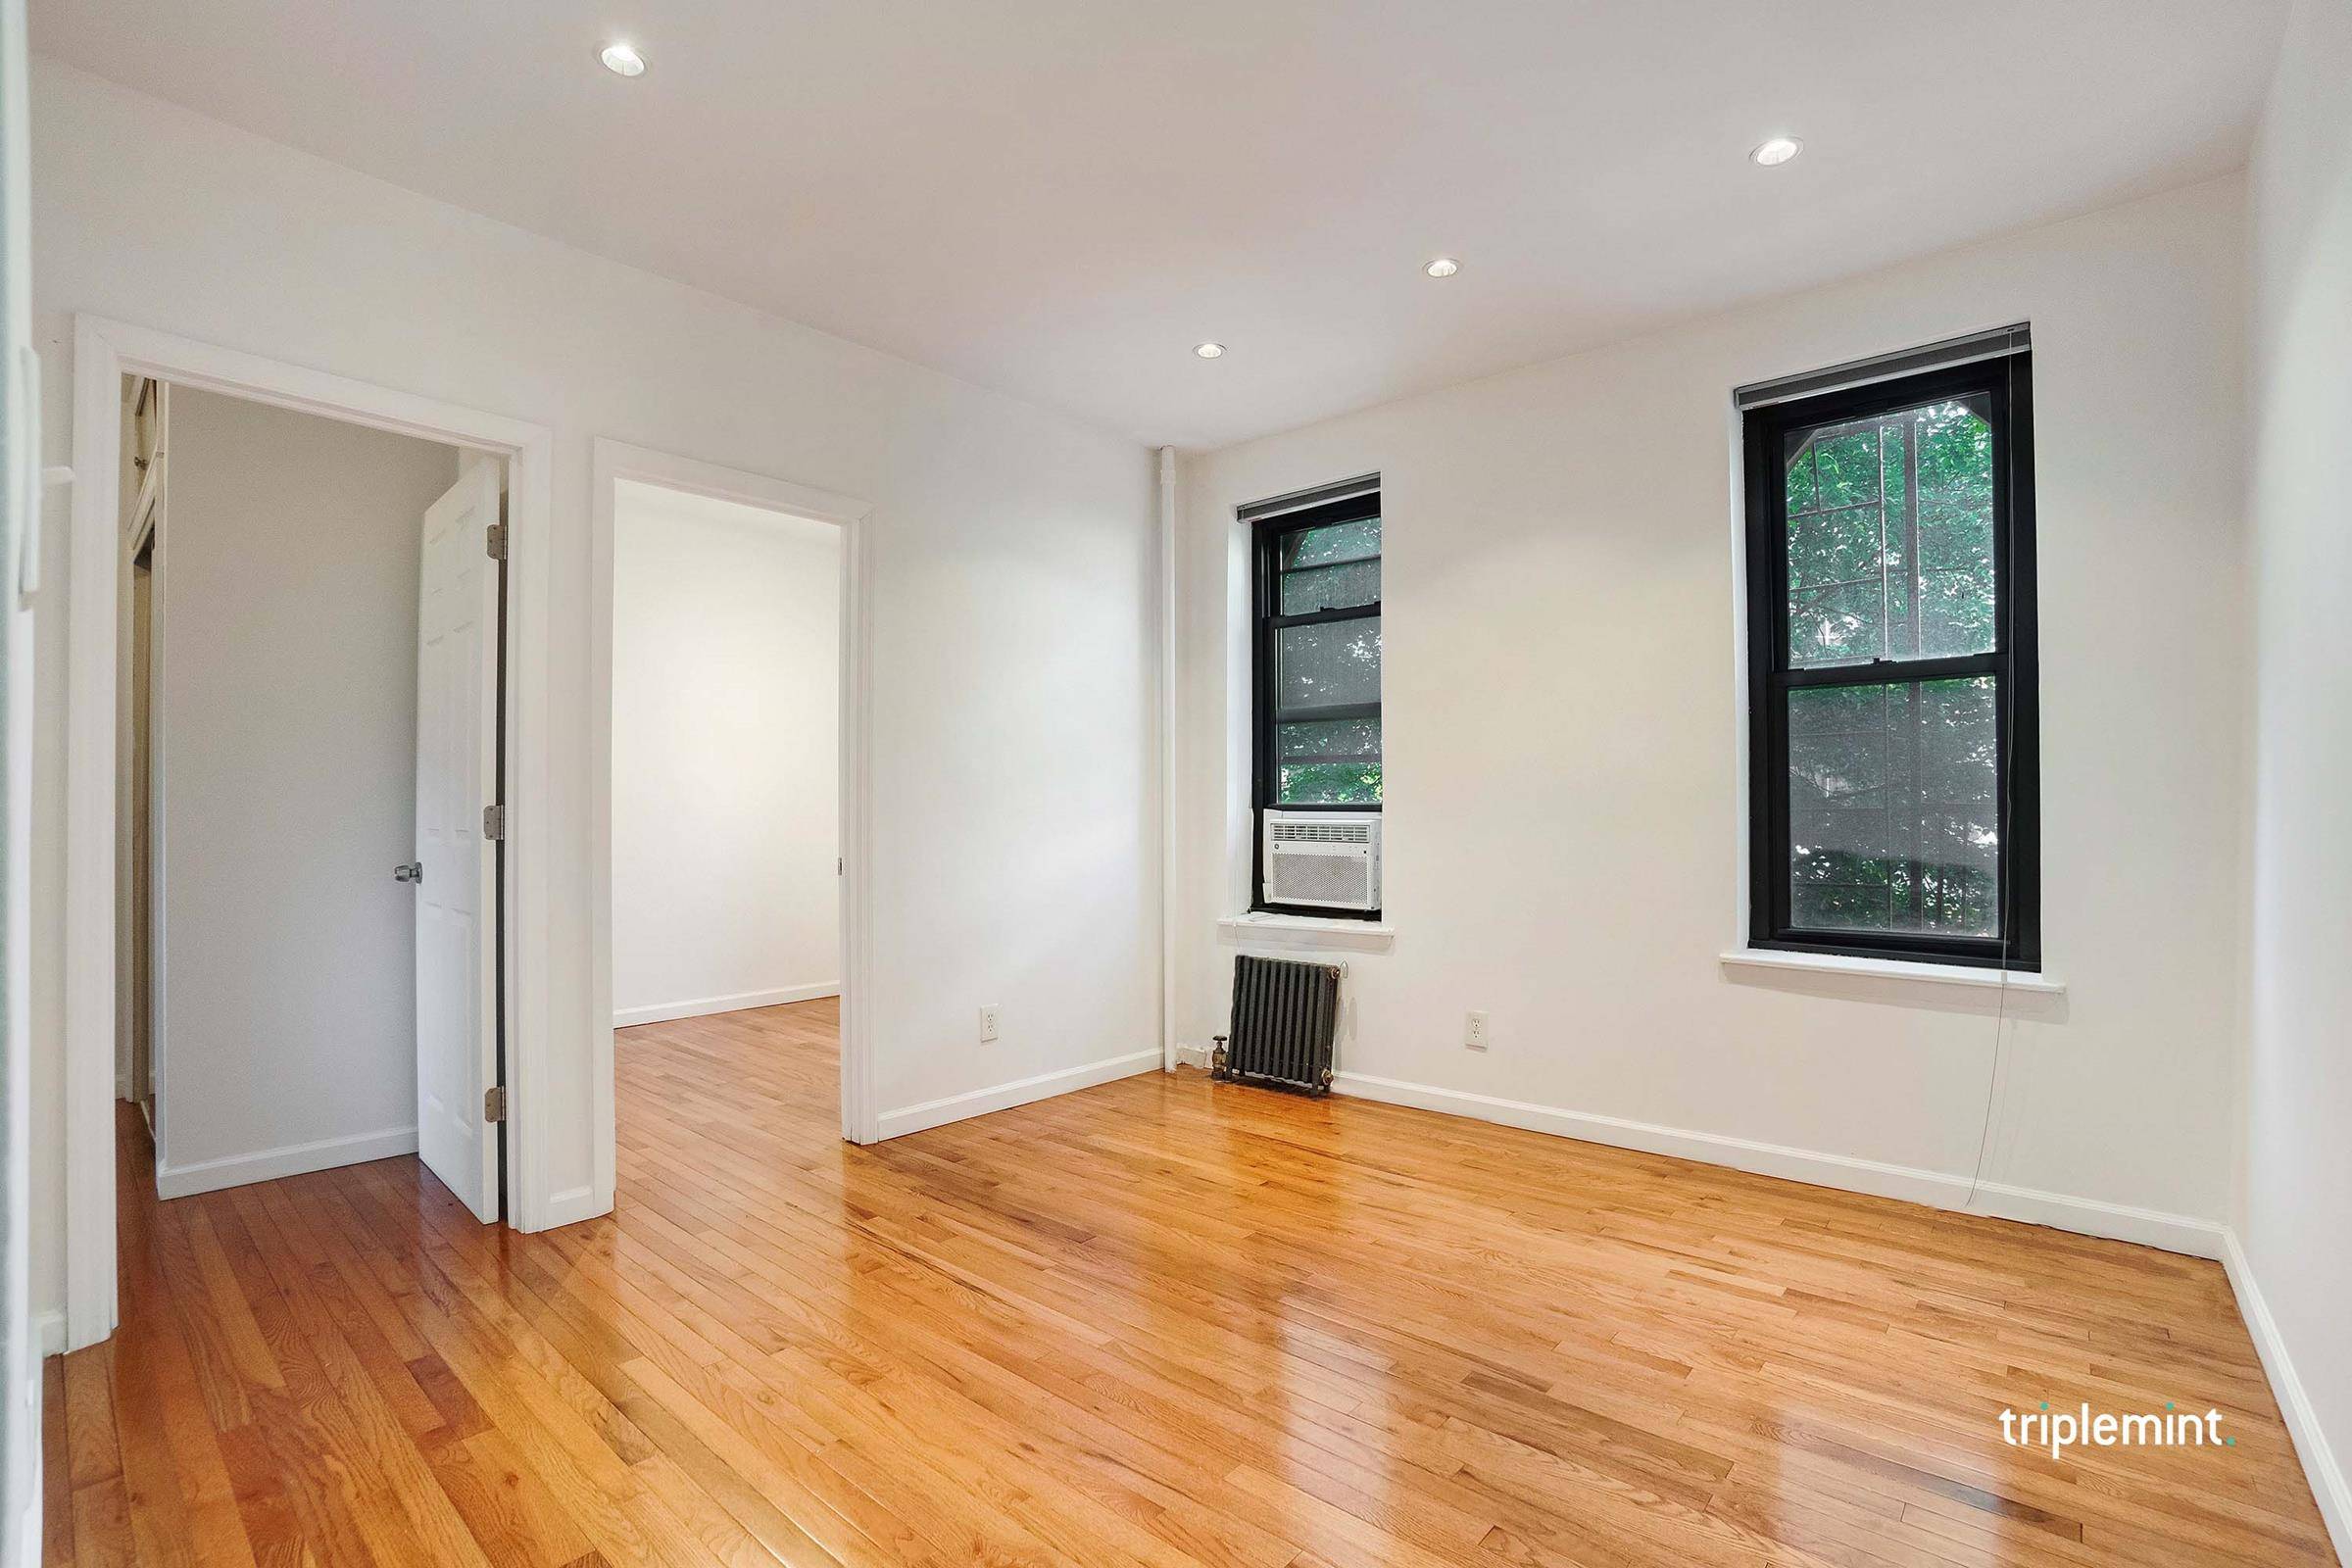 Welcome Home ! This beautiful fully renovated 2 bed 1 bath has hardwood floors throughout.